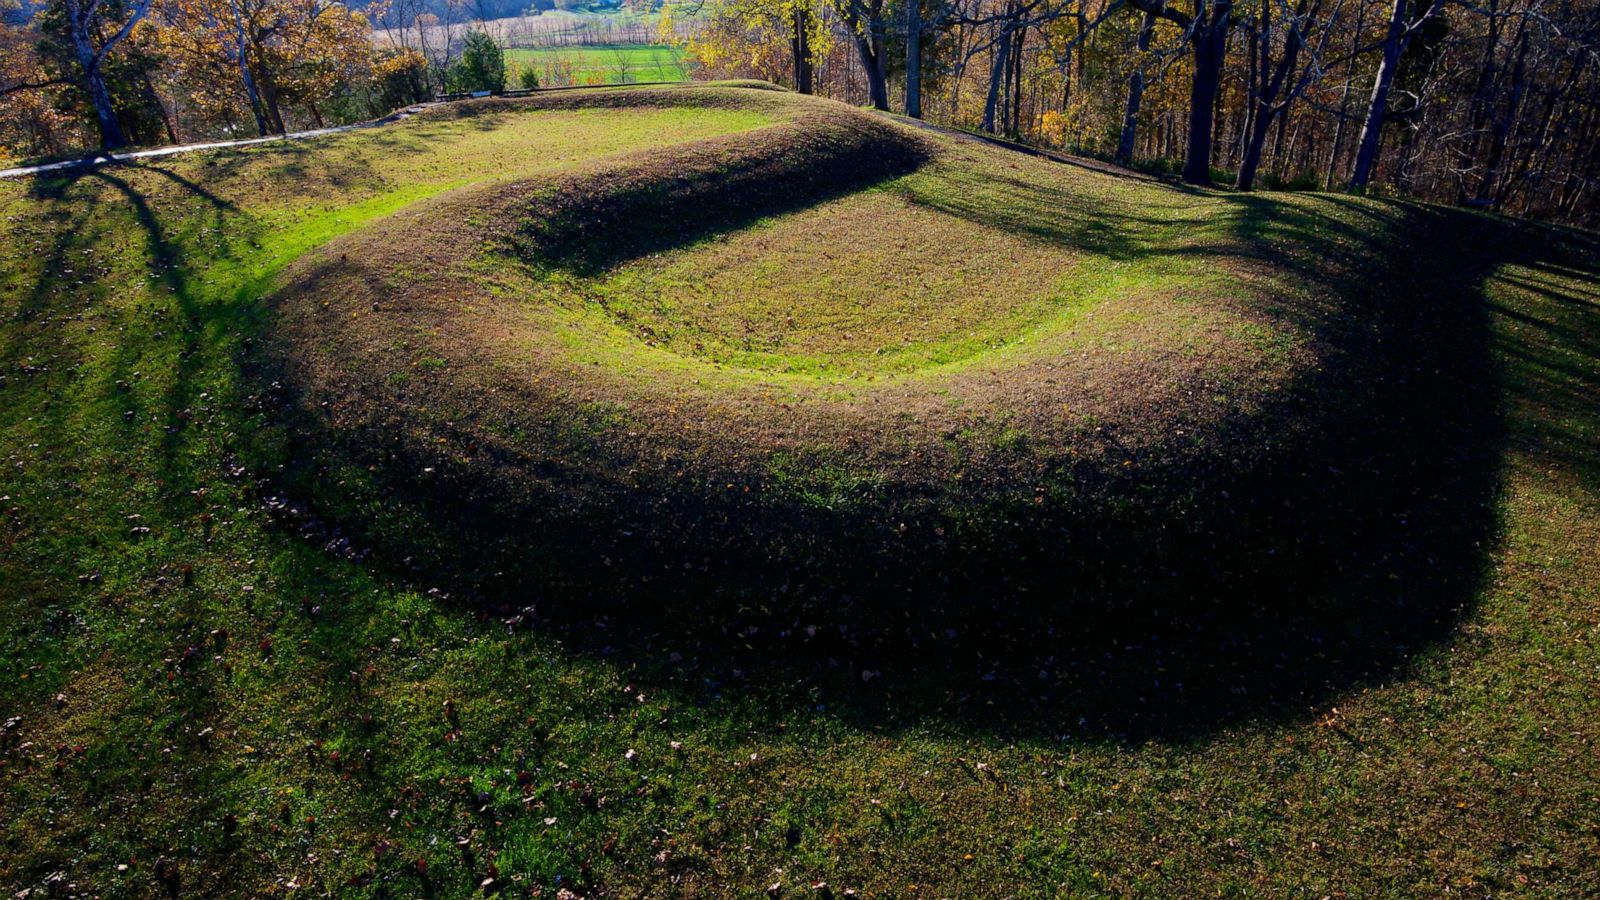 Serpent Mound Ohio Continues To Dazzle Inspire For The Summer Solstice Abc News